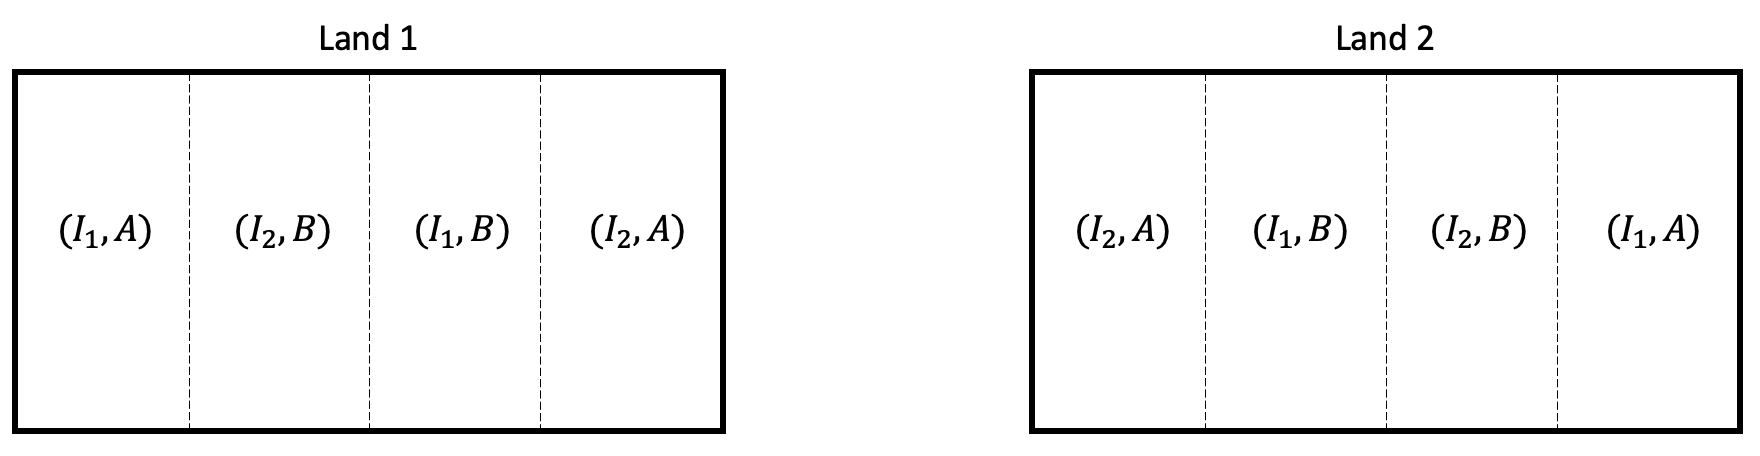 Two long rectangles of the same size, one labeled "Land 1" and the other "Land 2". Land 1 is divided by vertical dotted lines into 4 sections; from left to right, they are labeled (I1, A), (I2, B), (I1, B), and (I2, A). Land 2 is divided in the same way, with its sections labeled from left to right as (I2, A), (I1, B), (I2, B), and (I1, A).